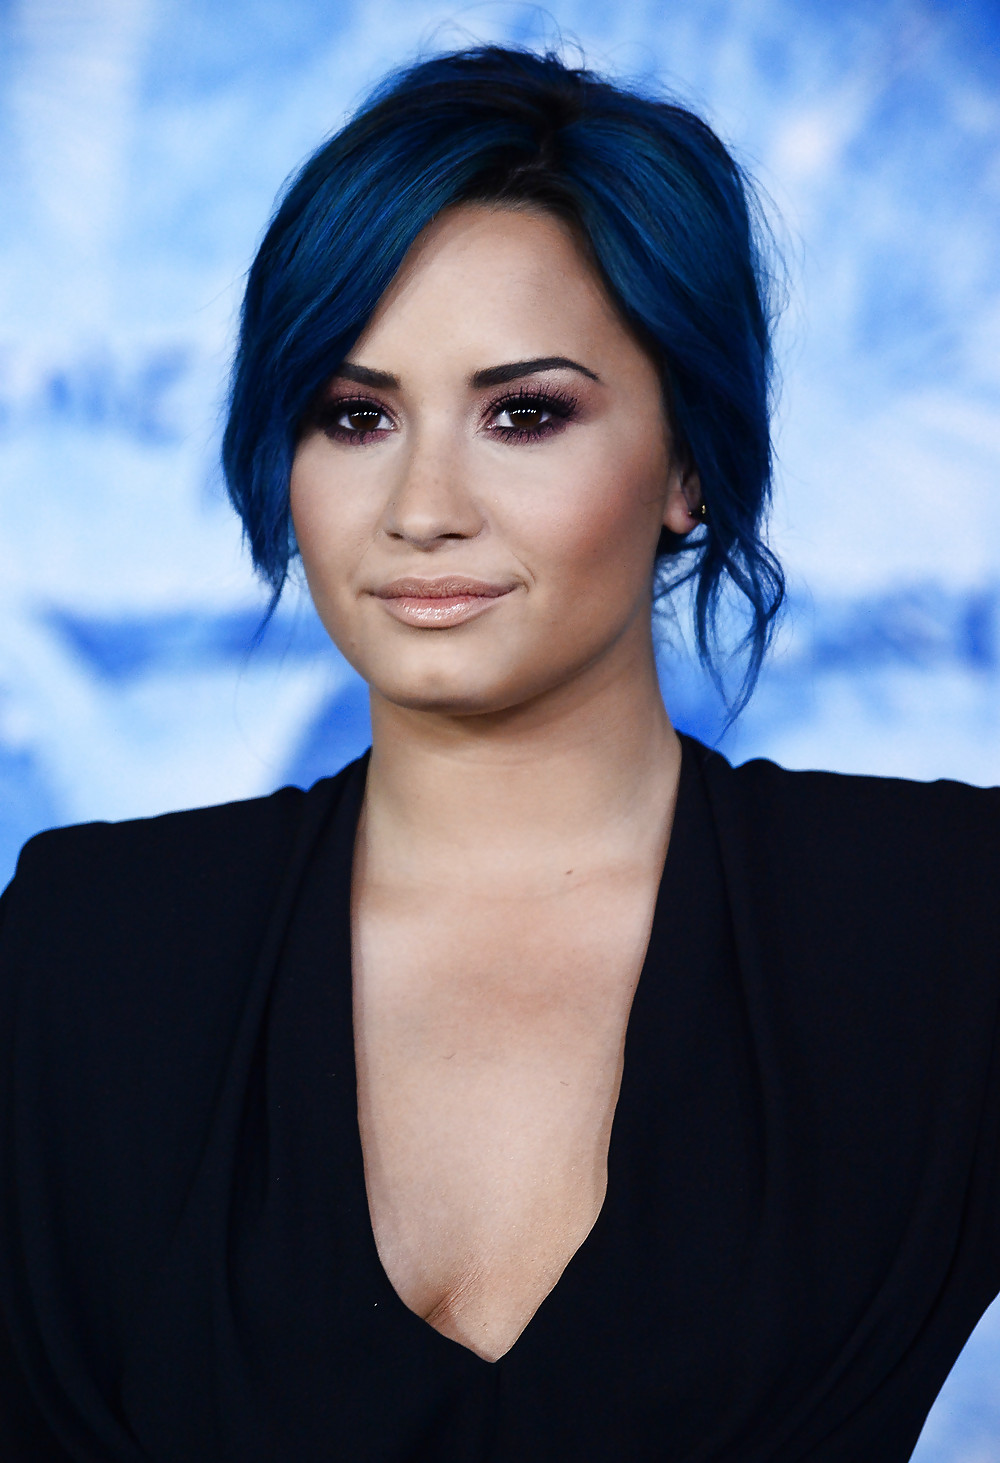 Demi Lovato with blue hair and business style #22180185